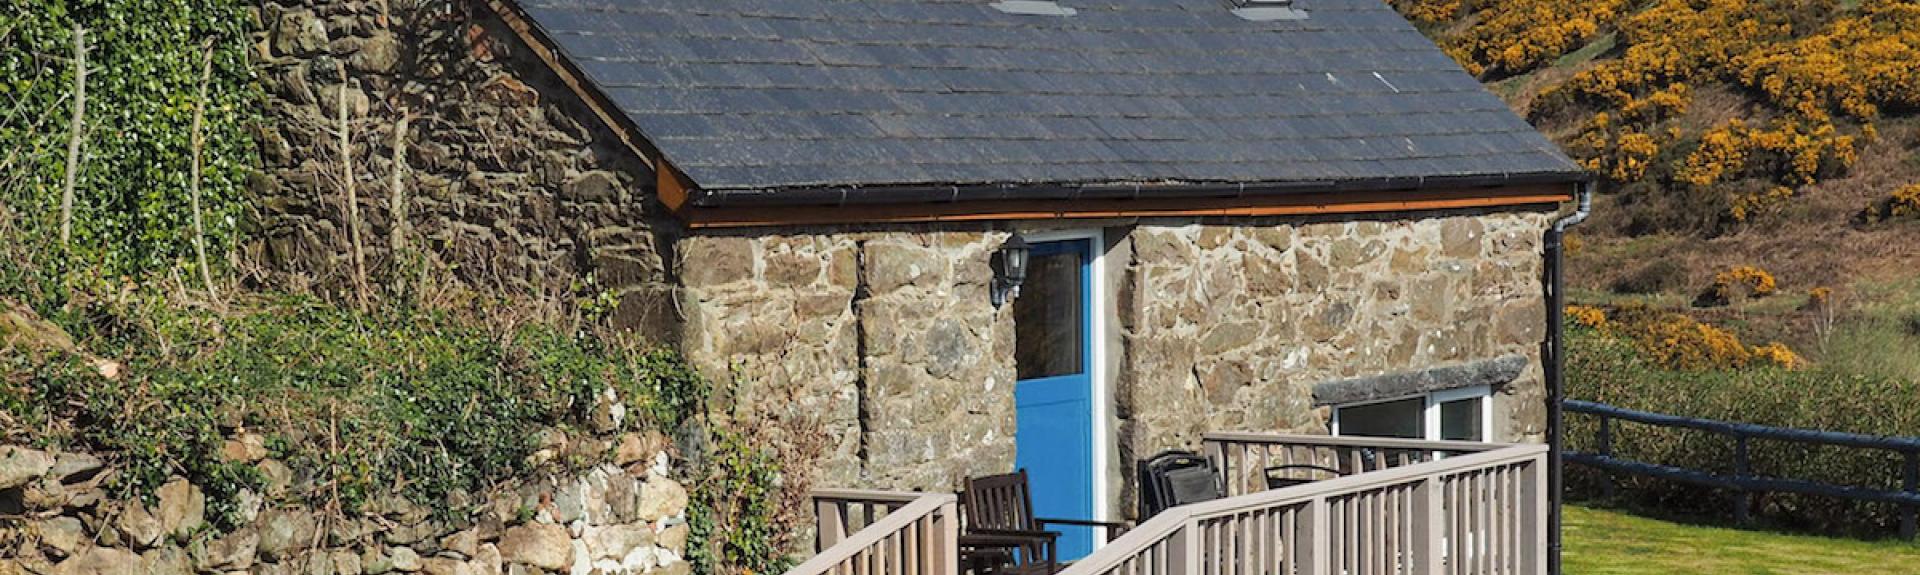 A barn conversion to create a holiday cottage in Abersoch: a wramp leasds to a wooden deck with outdoor seating and an entrance to this stone-built property with rural and sea views.